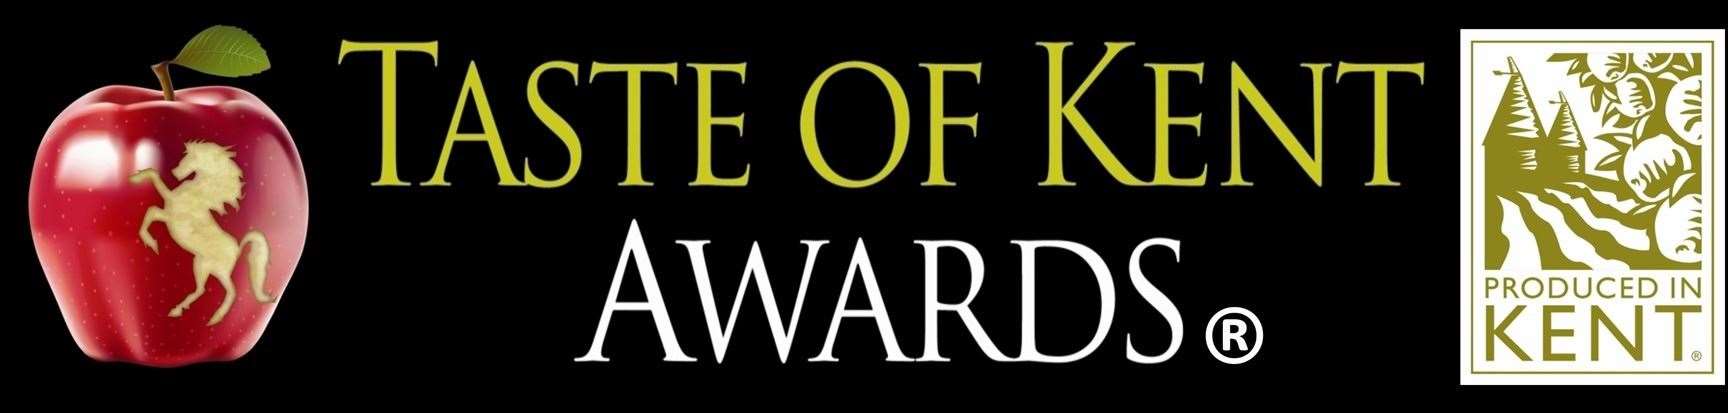 Voting has opened for the 2021 Taste of Kent Awards